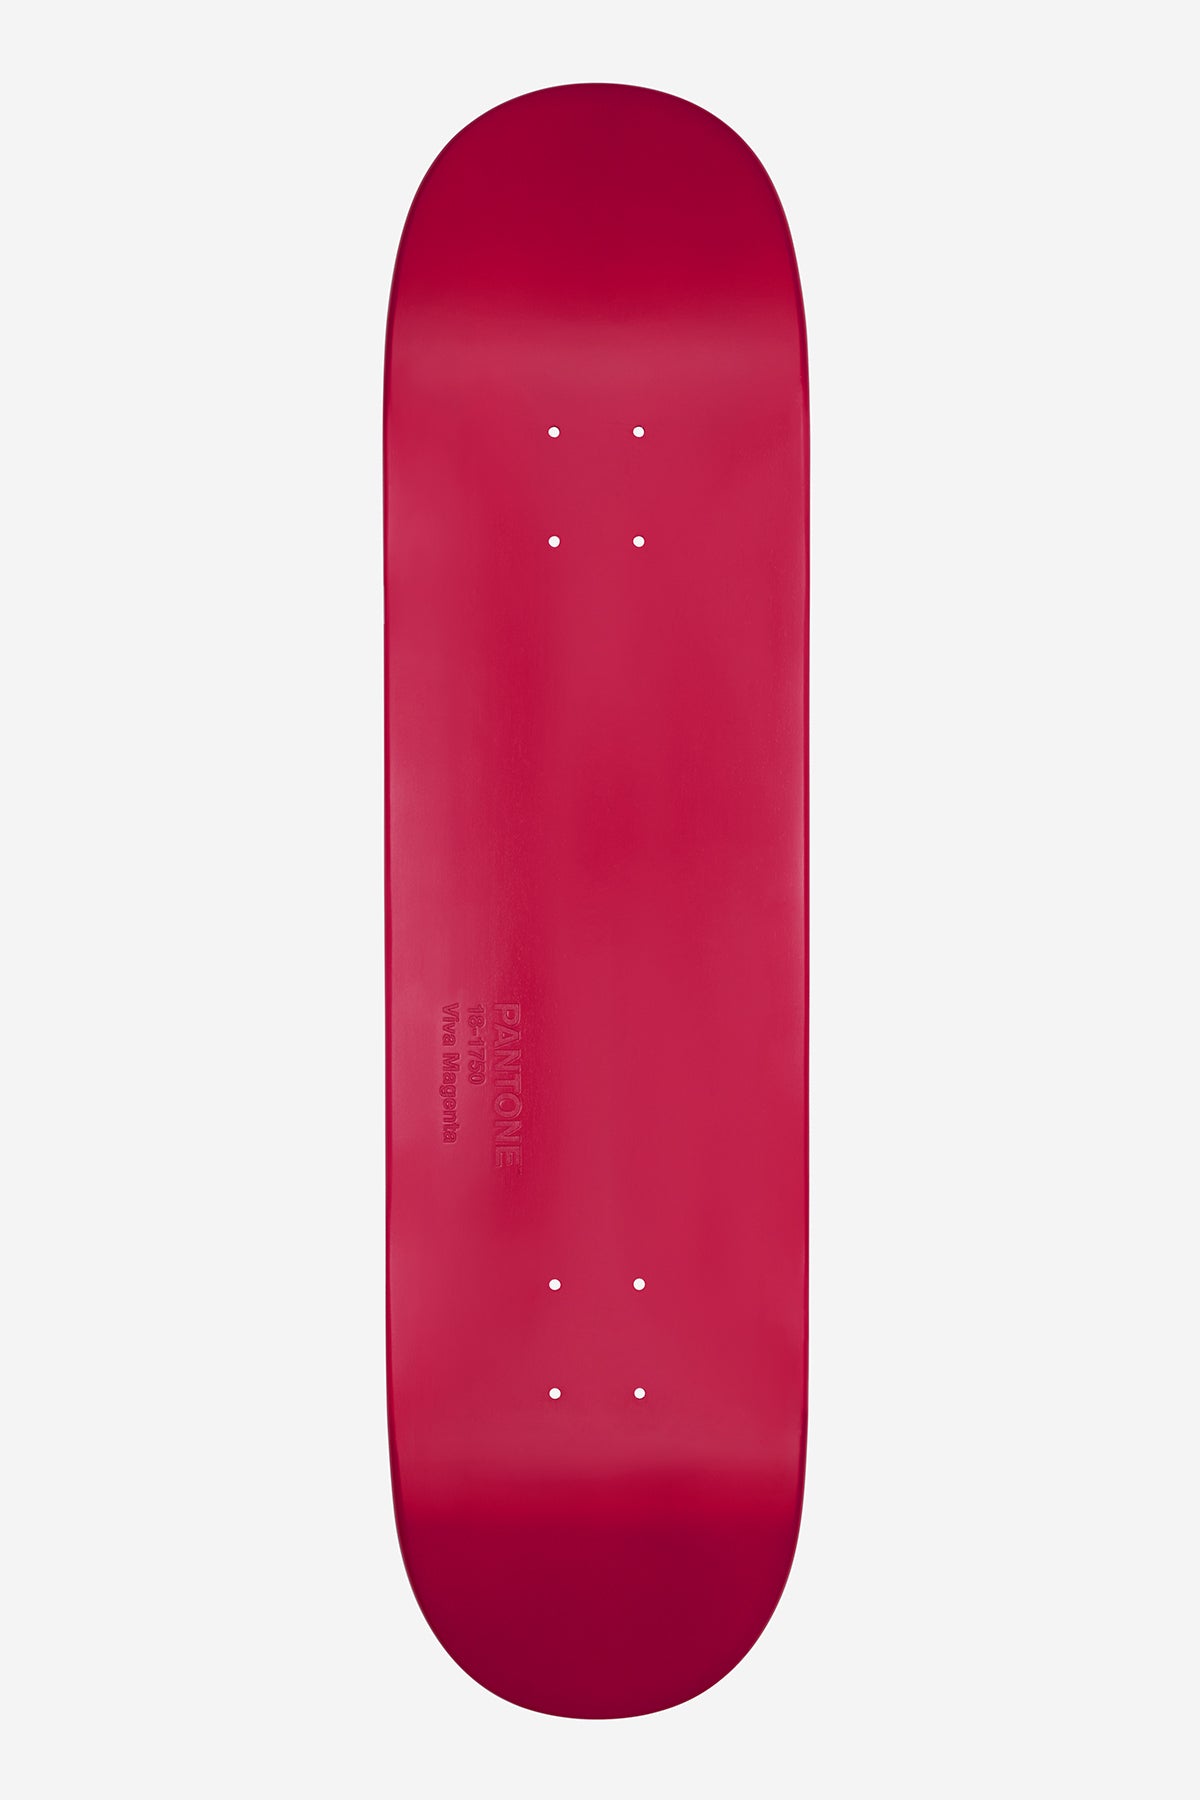 bottom view of Pantone Color of the Year™ Dipped Deck - Viva Magenta